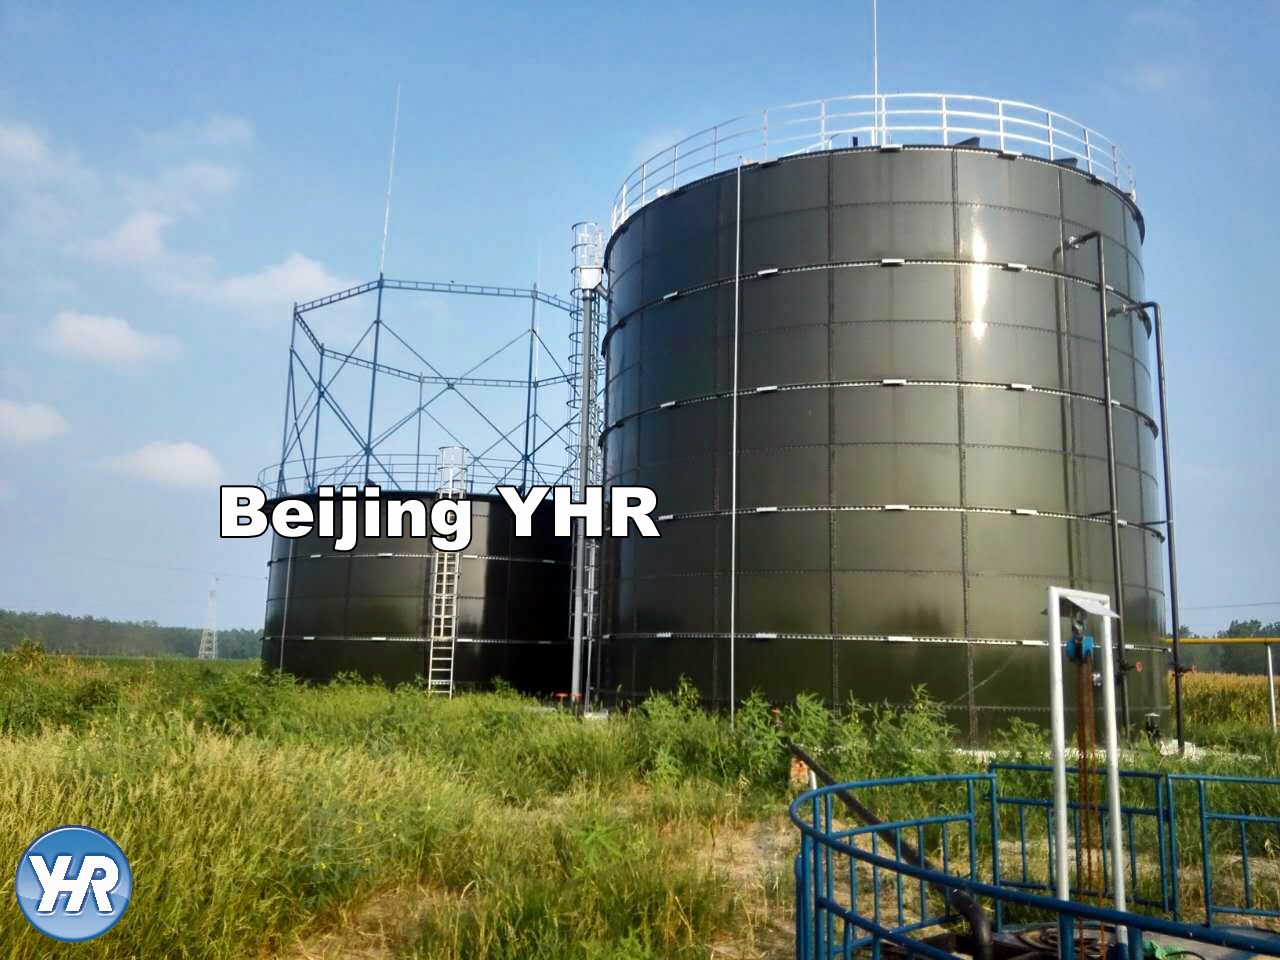 China Gas Impermeable Glass Lined Water Storage Tanks Capacity 20 M³ To 18000 M³ wholesale